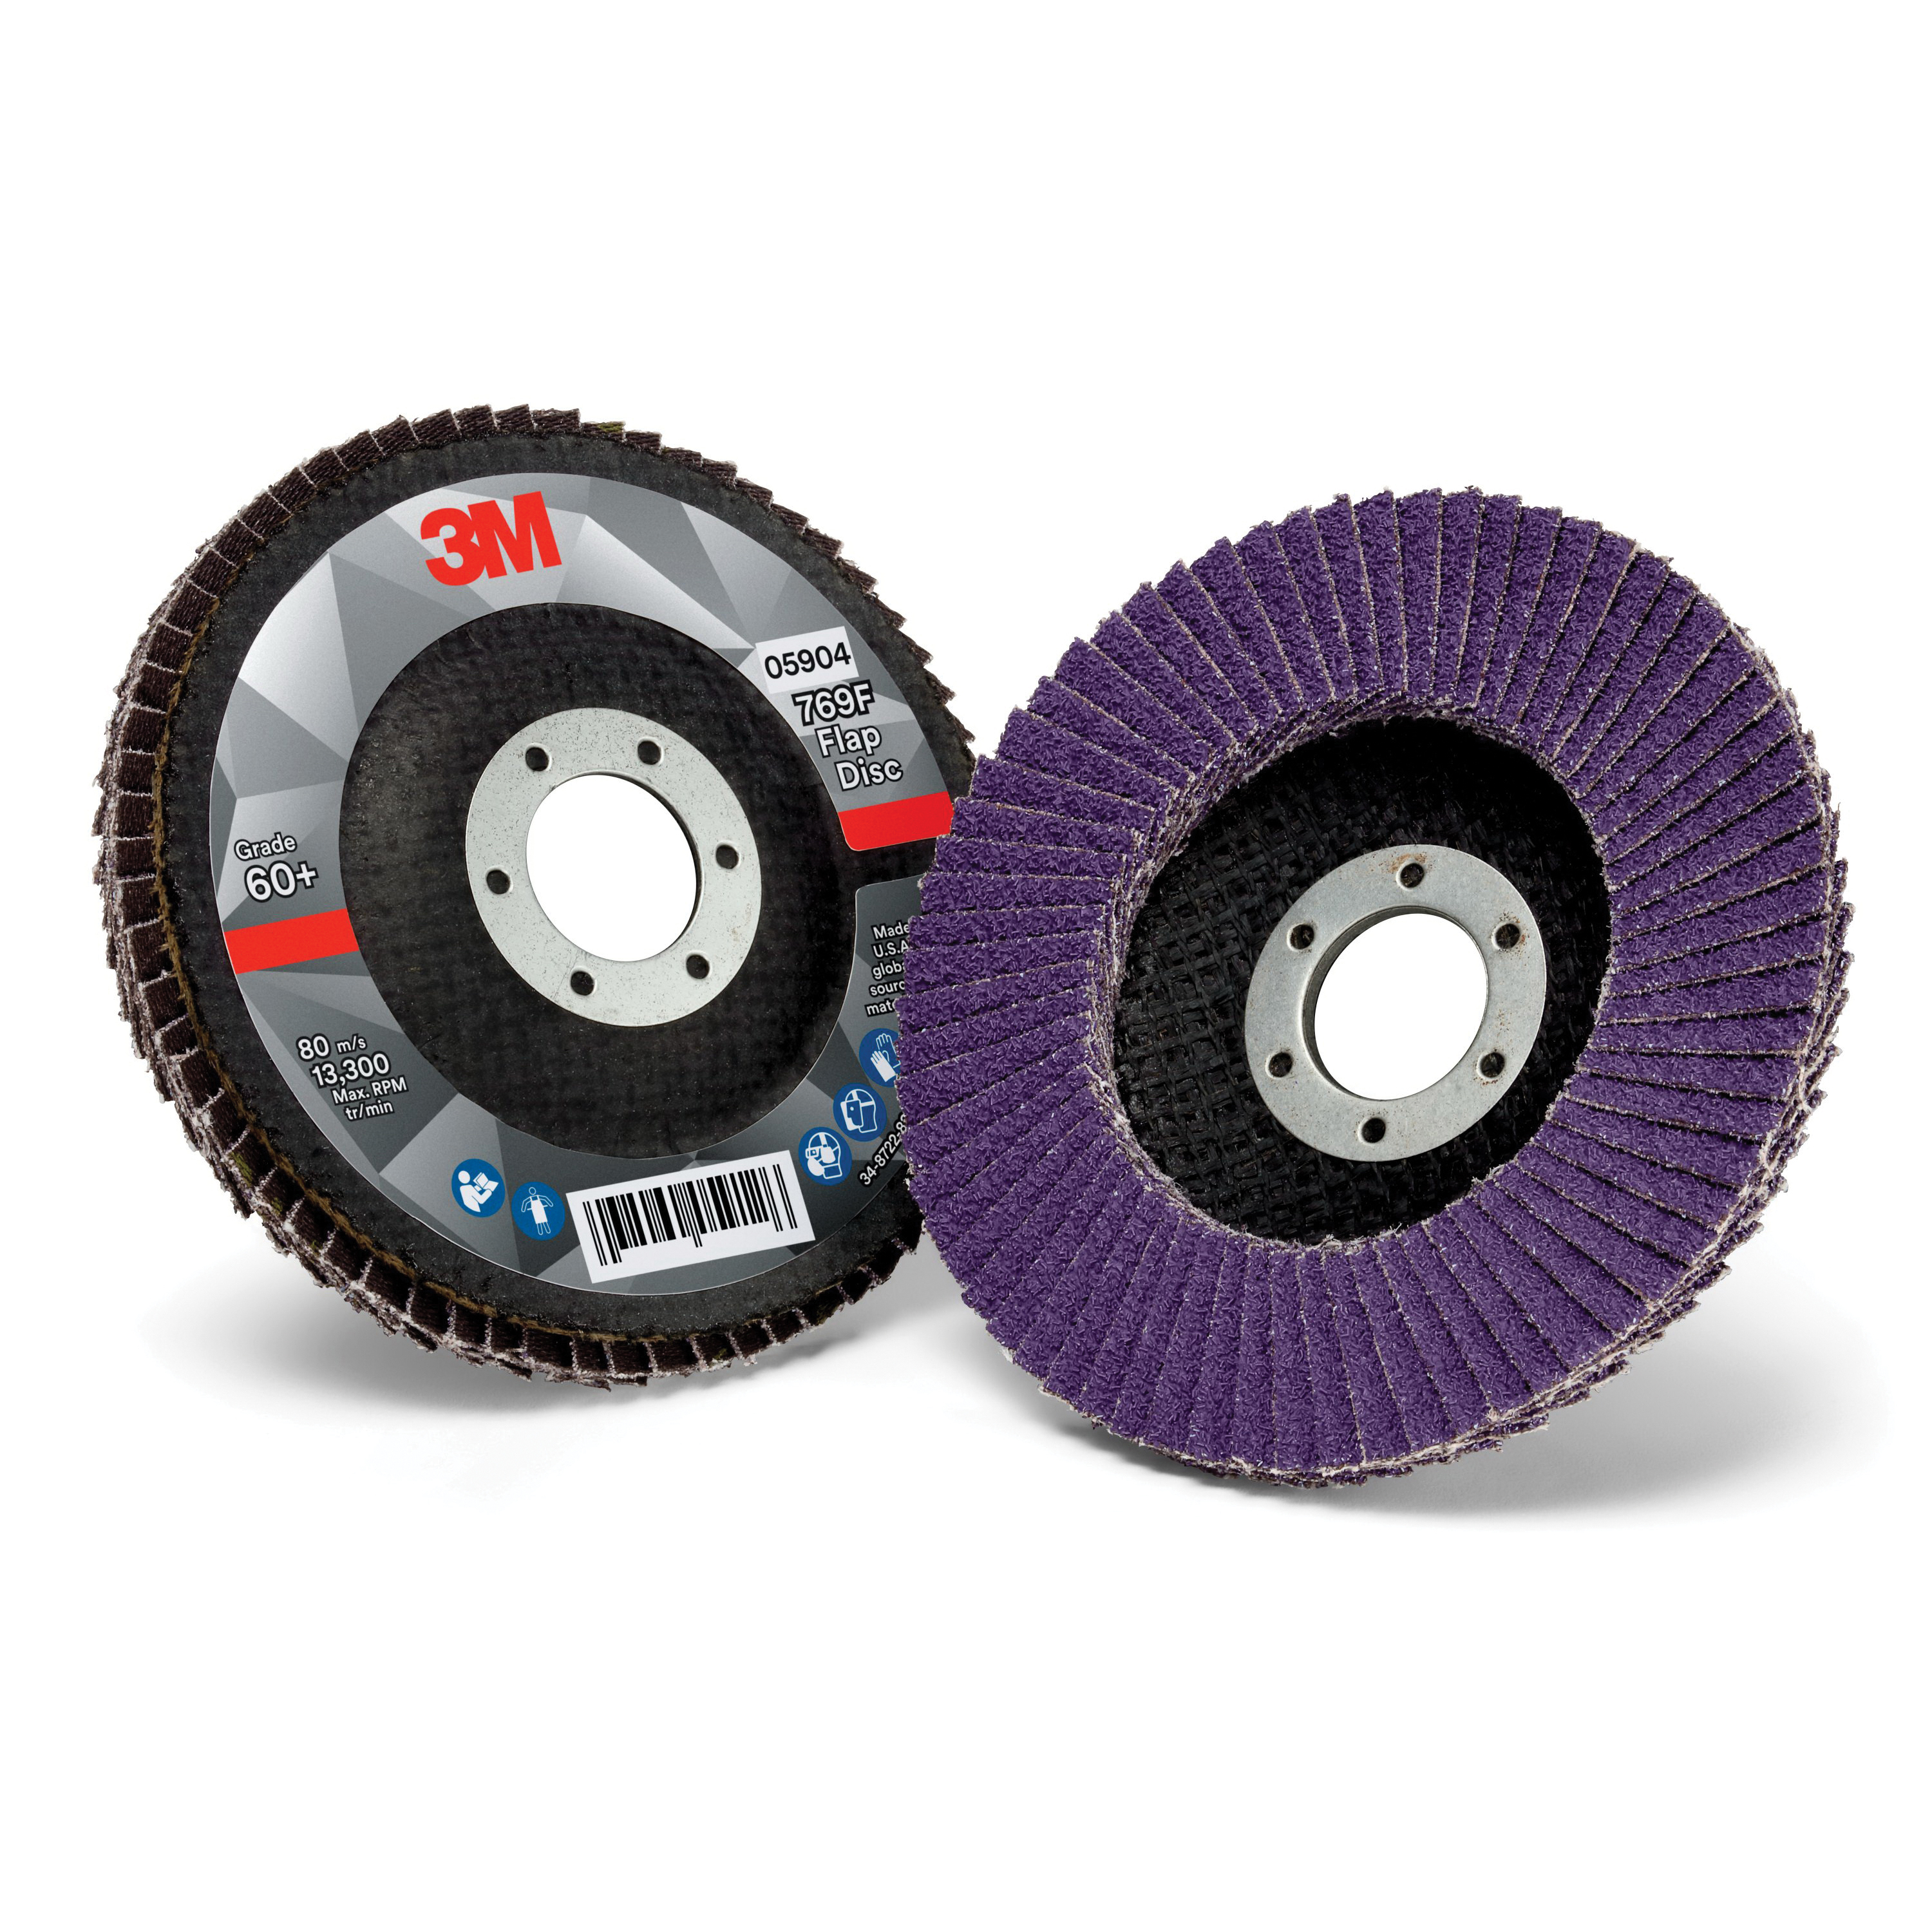 3M™ 038060-05904 Open Coated Abrasive Flap Disc, 4-1/2 in Dia, 7/8 in Center Hole, 60+ Grit, Precision Shaped Ceramic Abrasive, Type 27 Disc